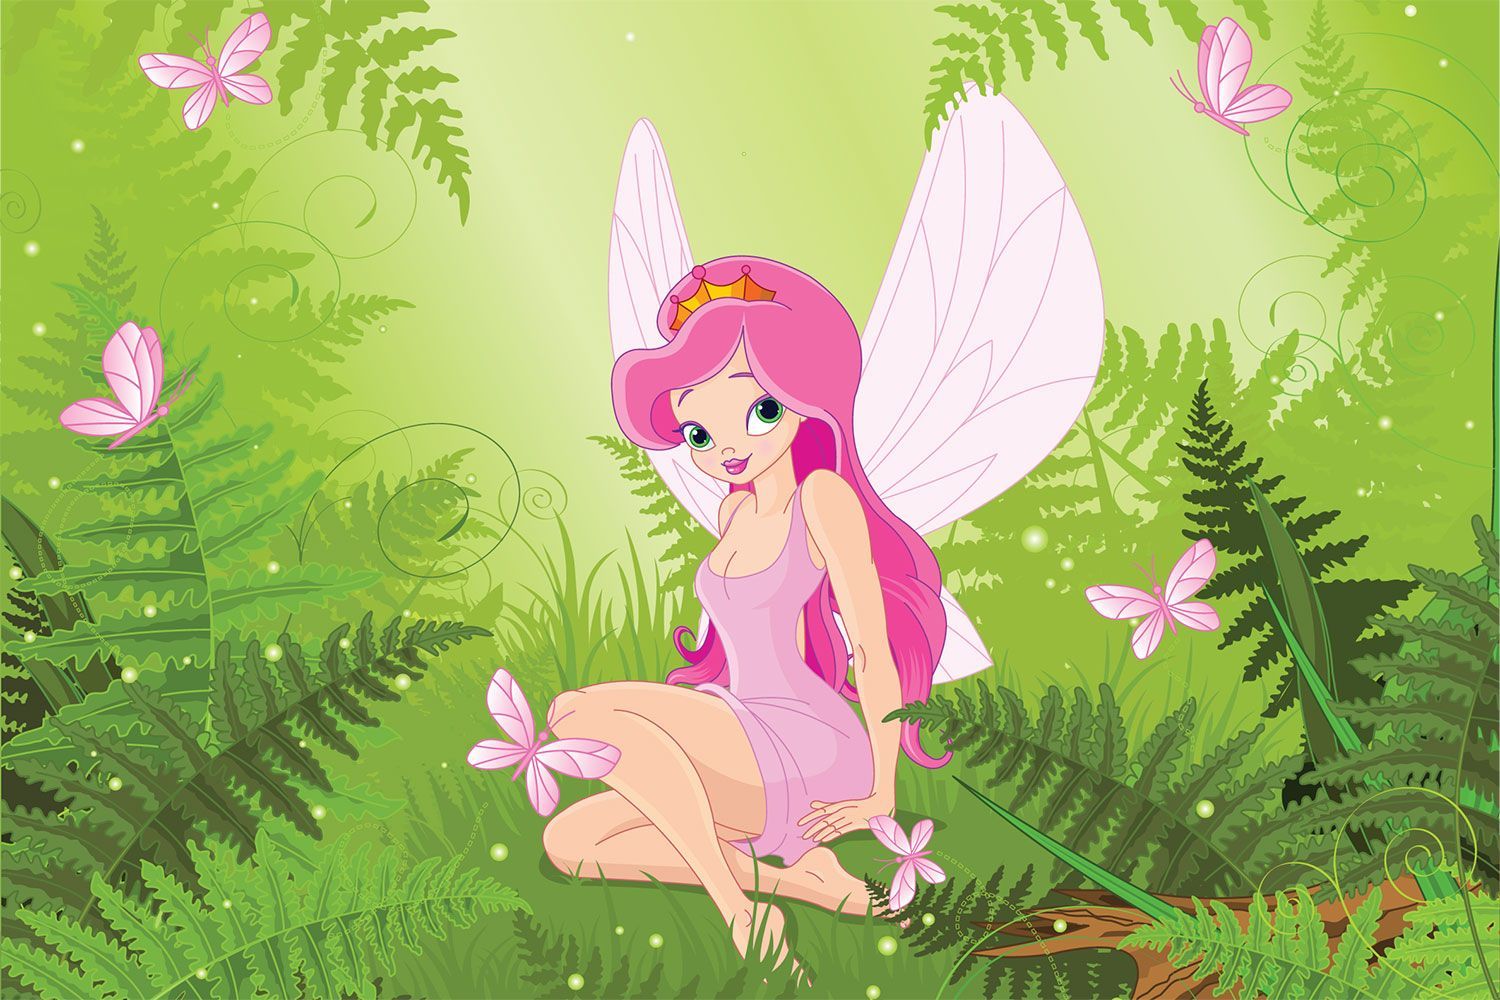 Choose Little Fairy Wallpaper to create fantastic wall decor in your room or browse hundreds of other wallpaper at printawal. Детские наклейки, Ремесла, Наклейки